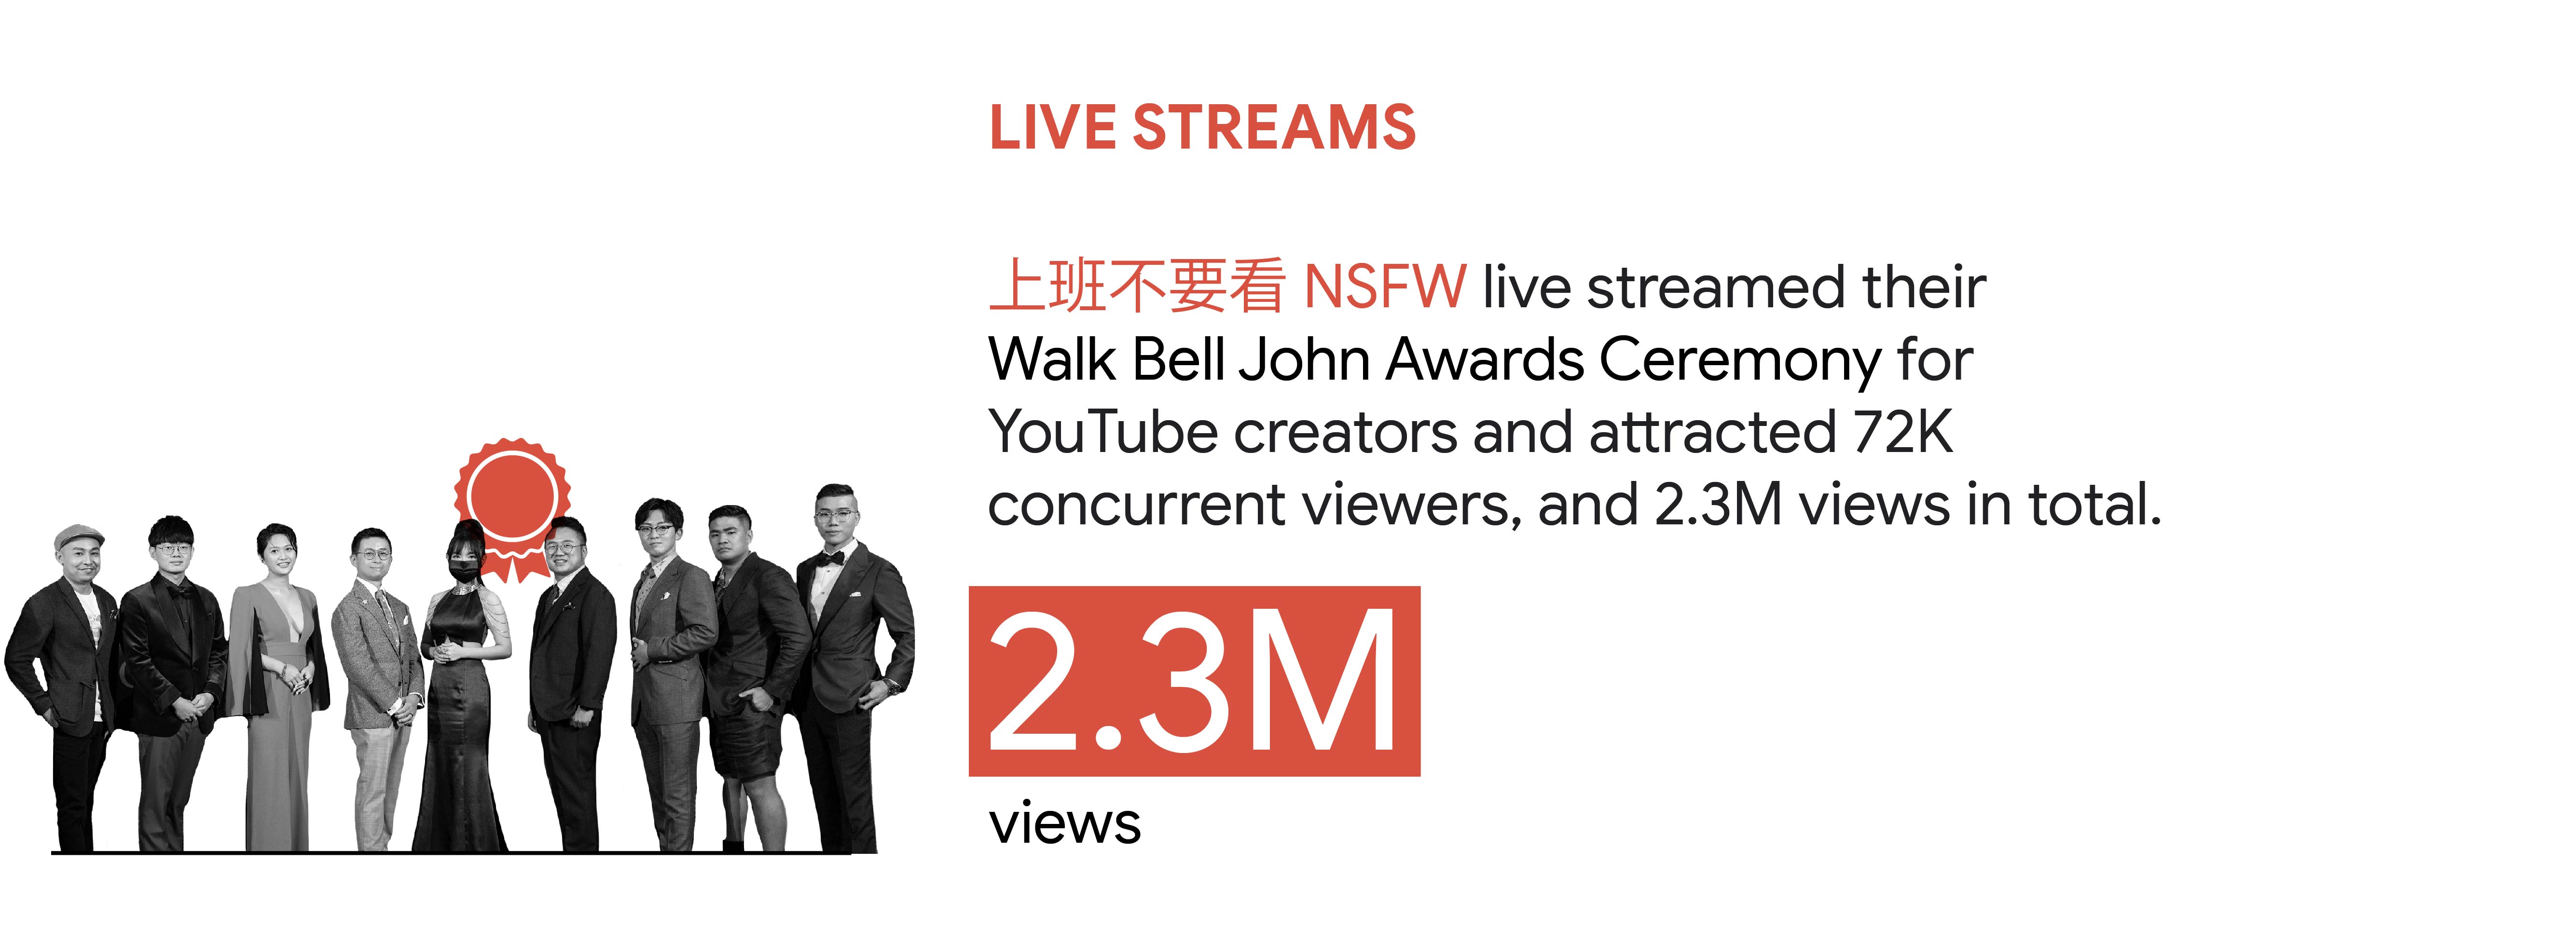 YouTube trend 2: Live streams. In Taiwan, 上班不要看 NSFW live streamed their Walk Bell John Awards Ceremony for YouTube creators and attracted 72K concurrent viewers, and 2.3M views in total.